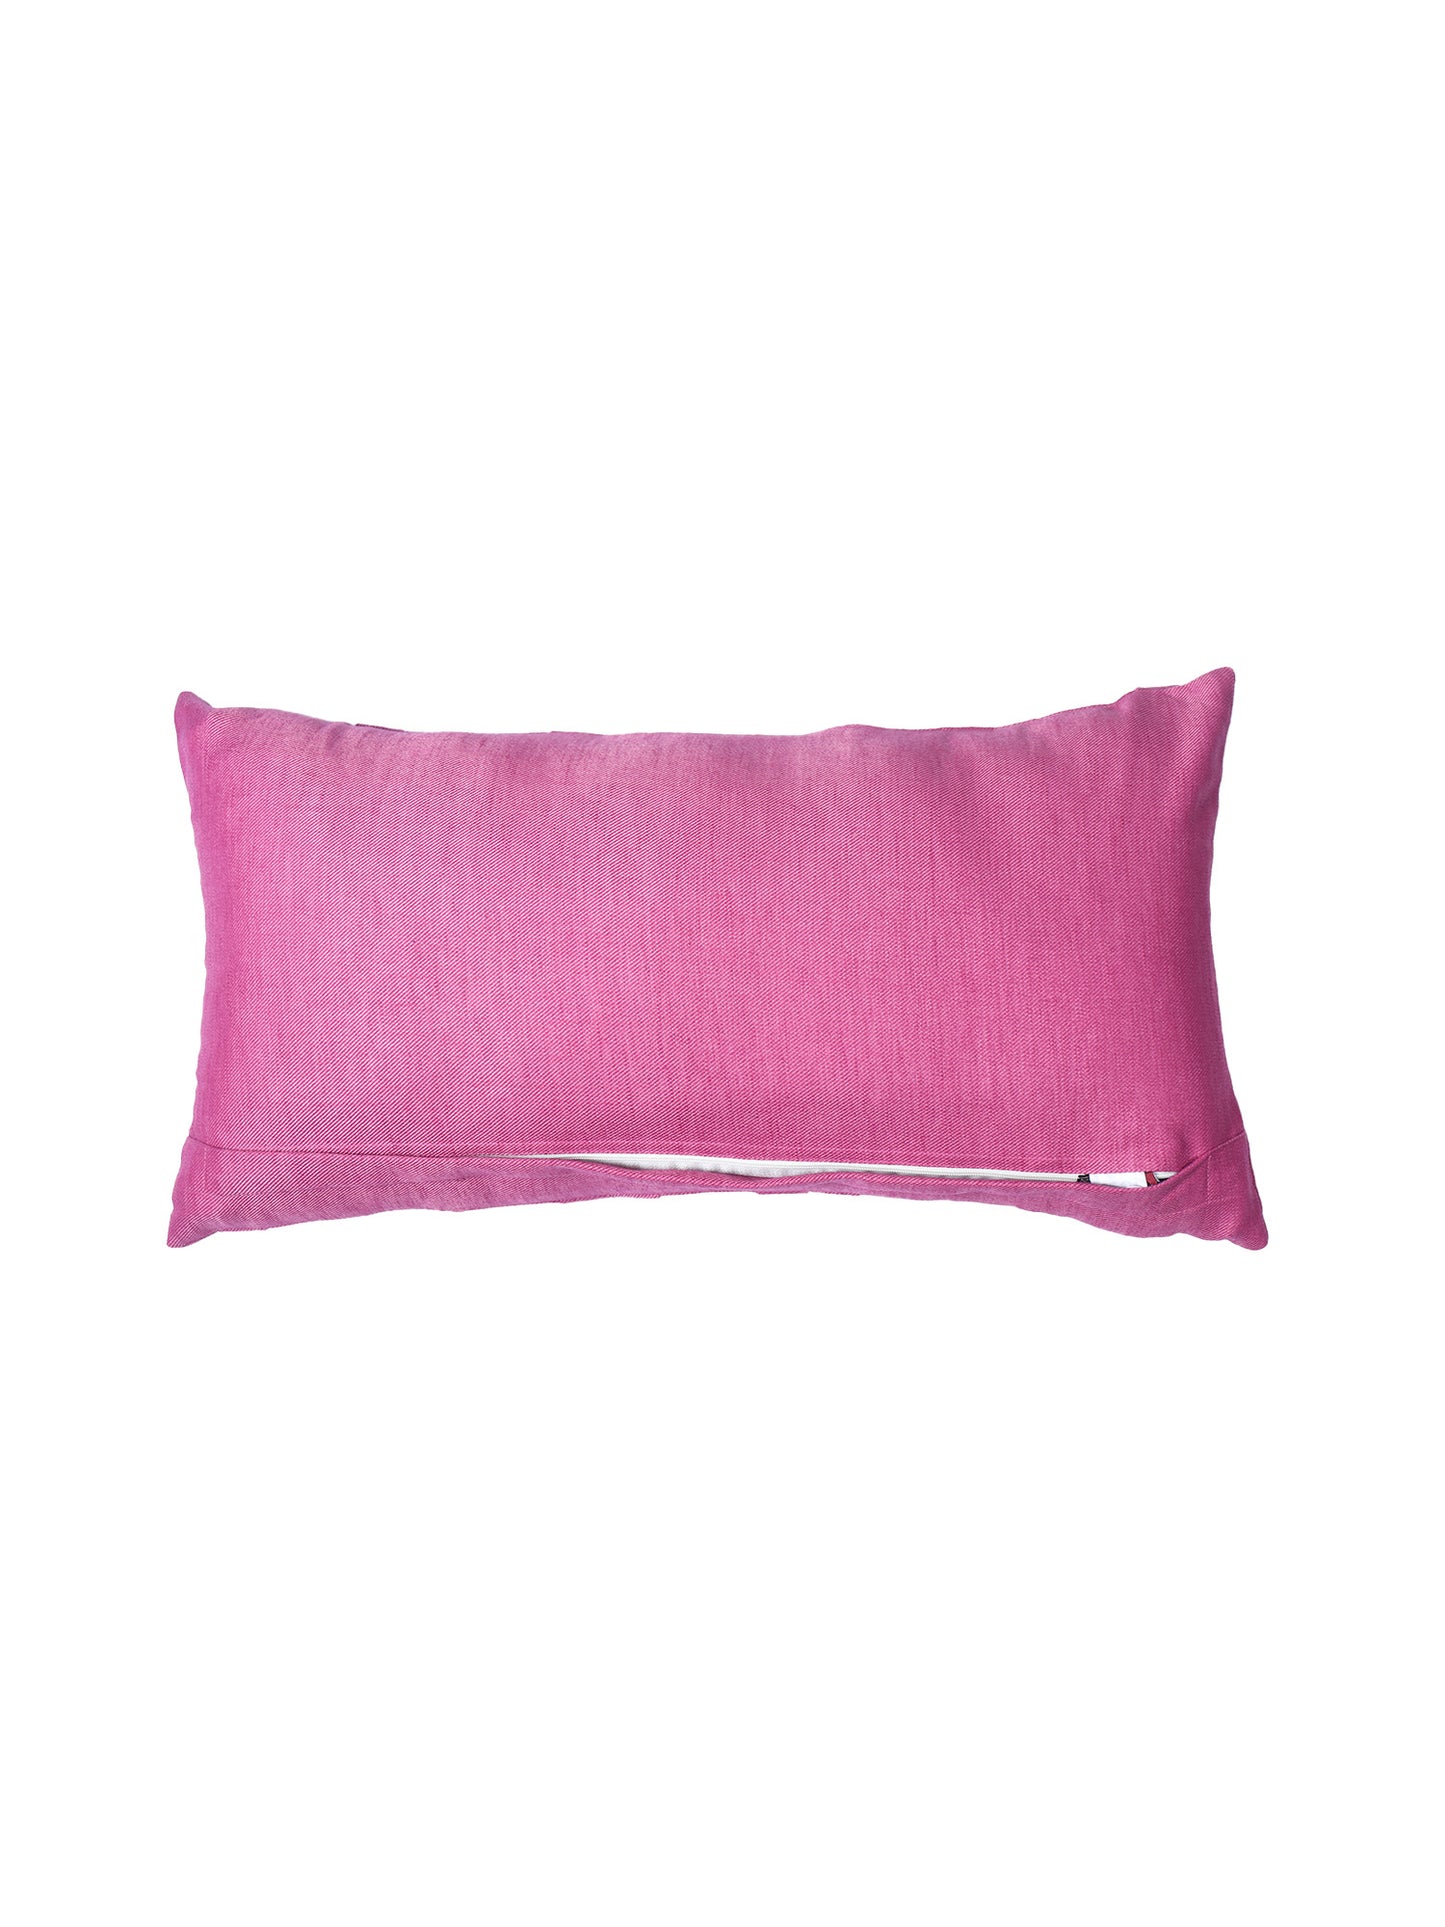 ZEBA World Rectangular Cushion Cover for Sofa - Lumbar Cushion | Pleated Stich with Button - Polyester Blend | Magenta Pink - 12x22in(30x55cm) (Pack of 1)